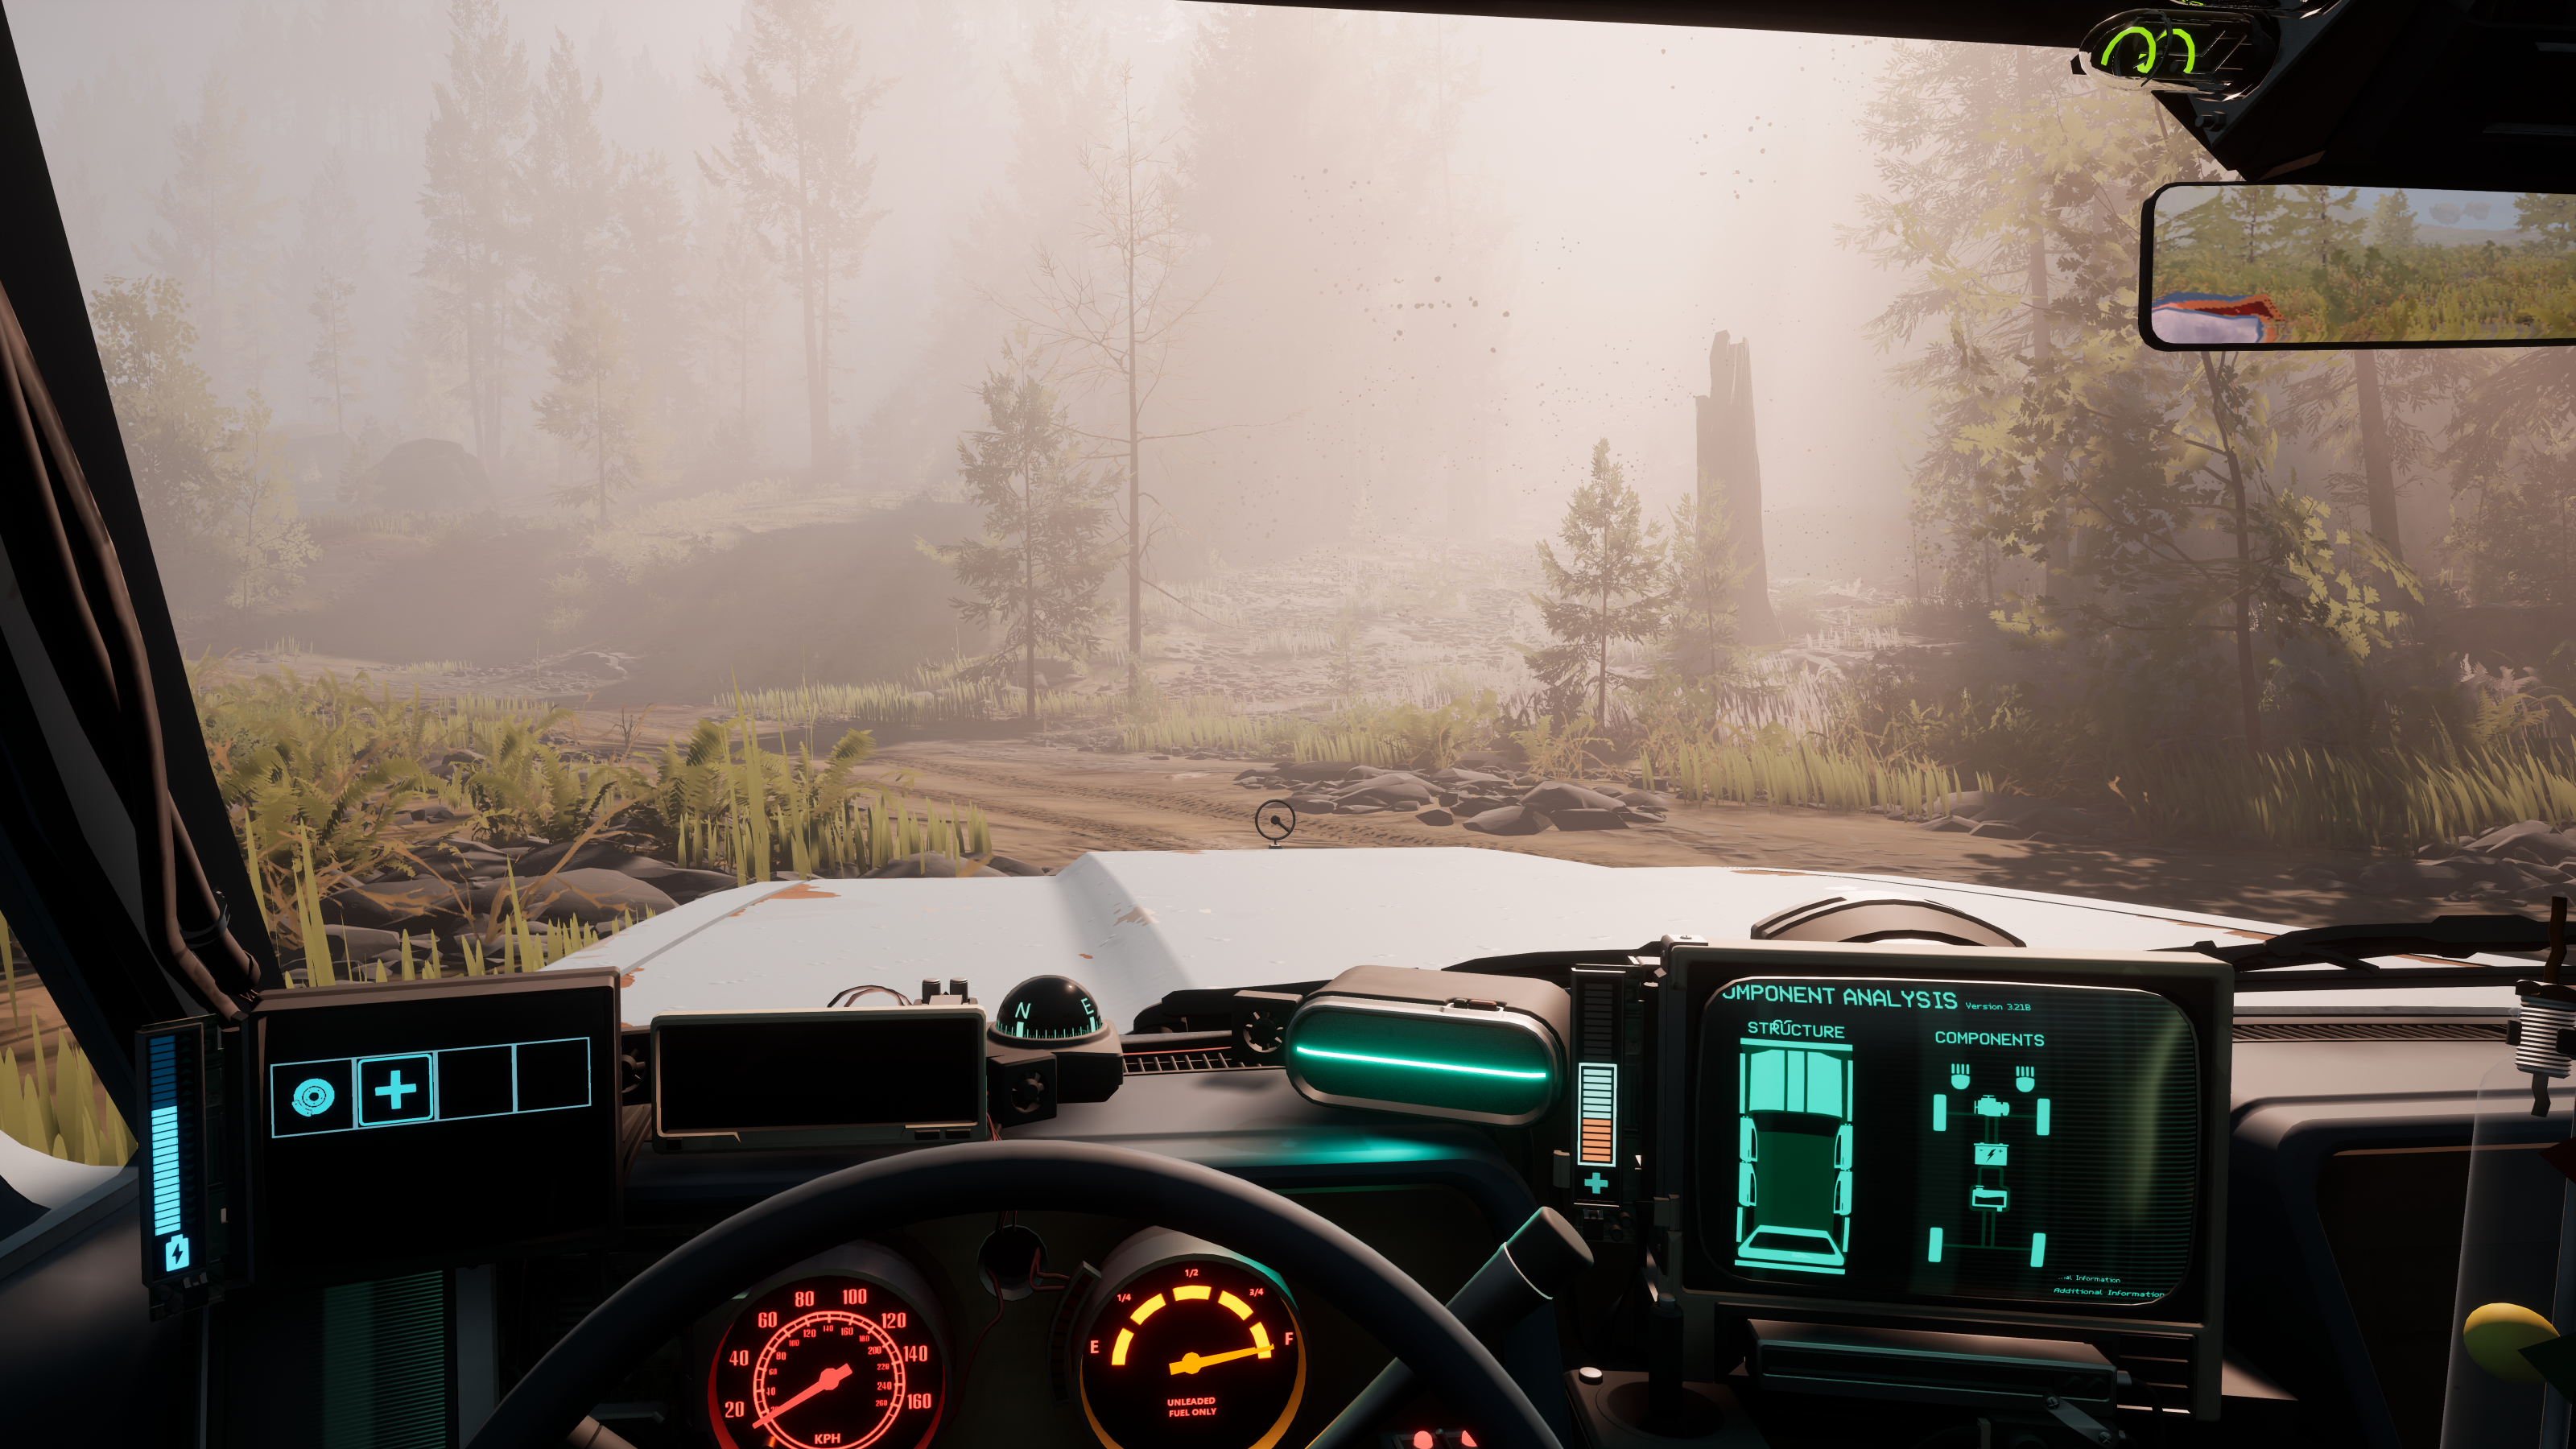 Pacific Drive preview - in the driver’s seat, a somewhat high-tech dashboard with a green outline of the car on display, looking out at a hazy forest